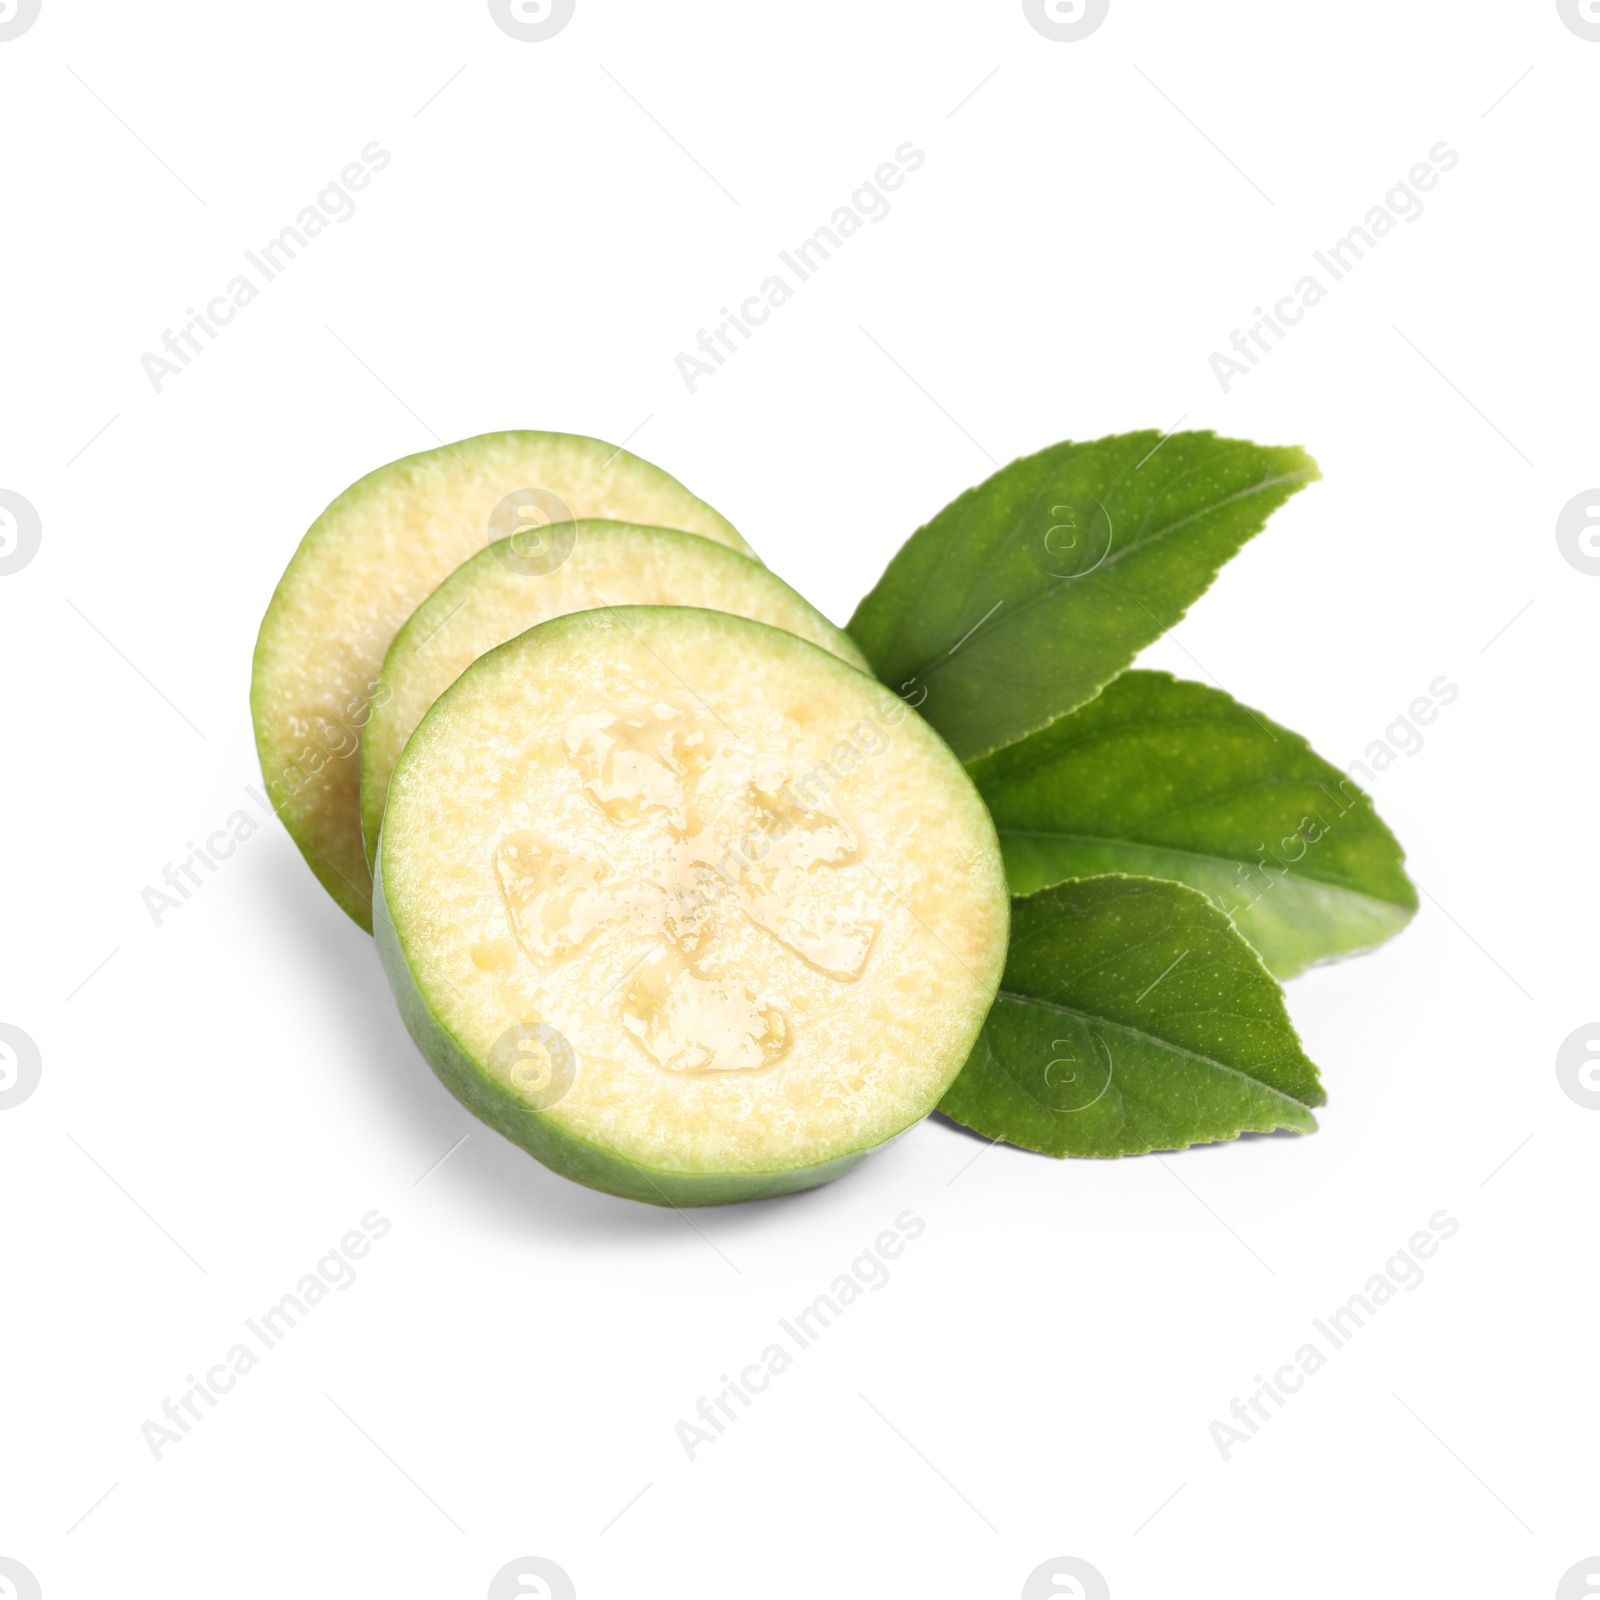 Photo of Slices of fresh feijoa fruit and leaves on white background